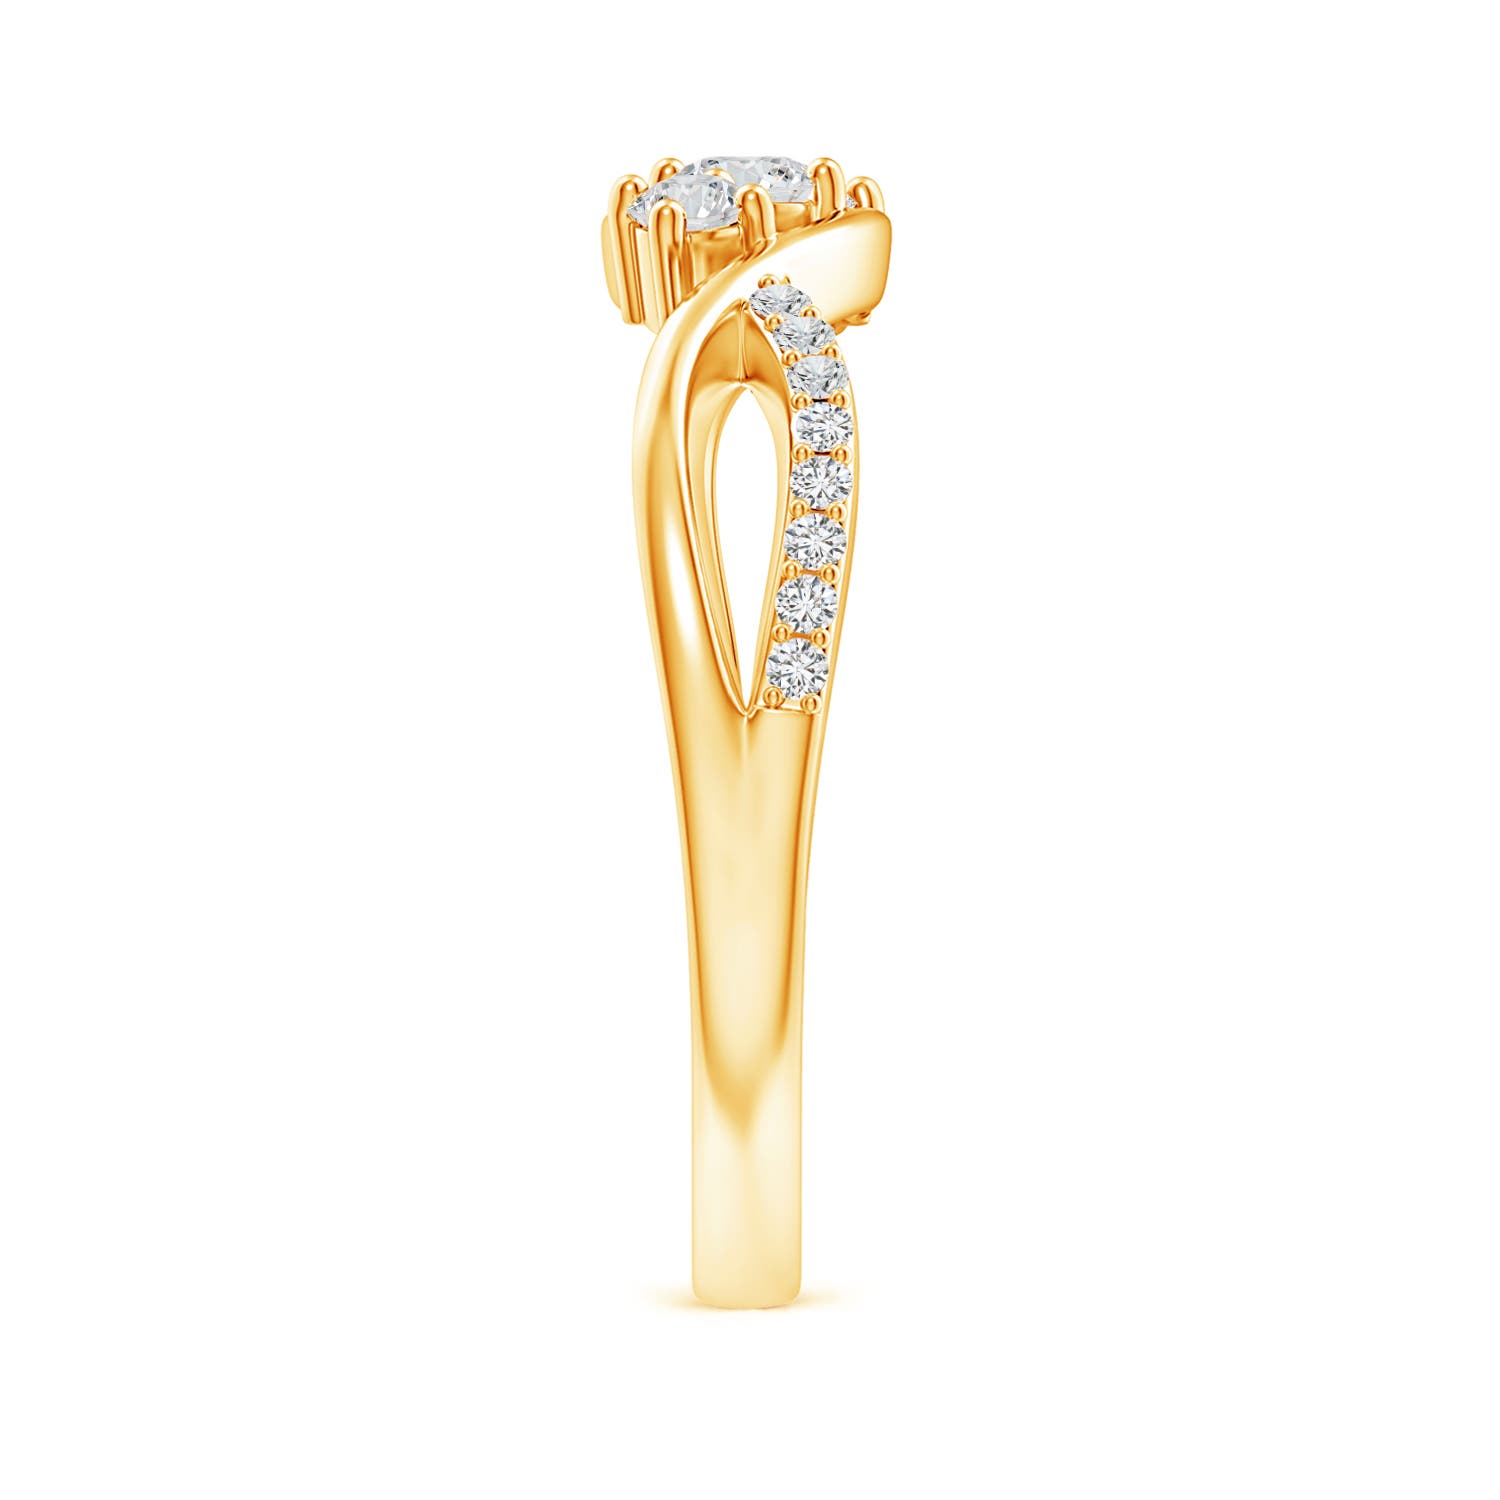 H, SI2 / 0.48 CT / 14 KT Yellow Gold